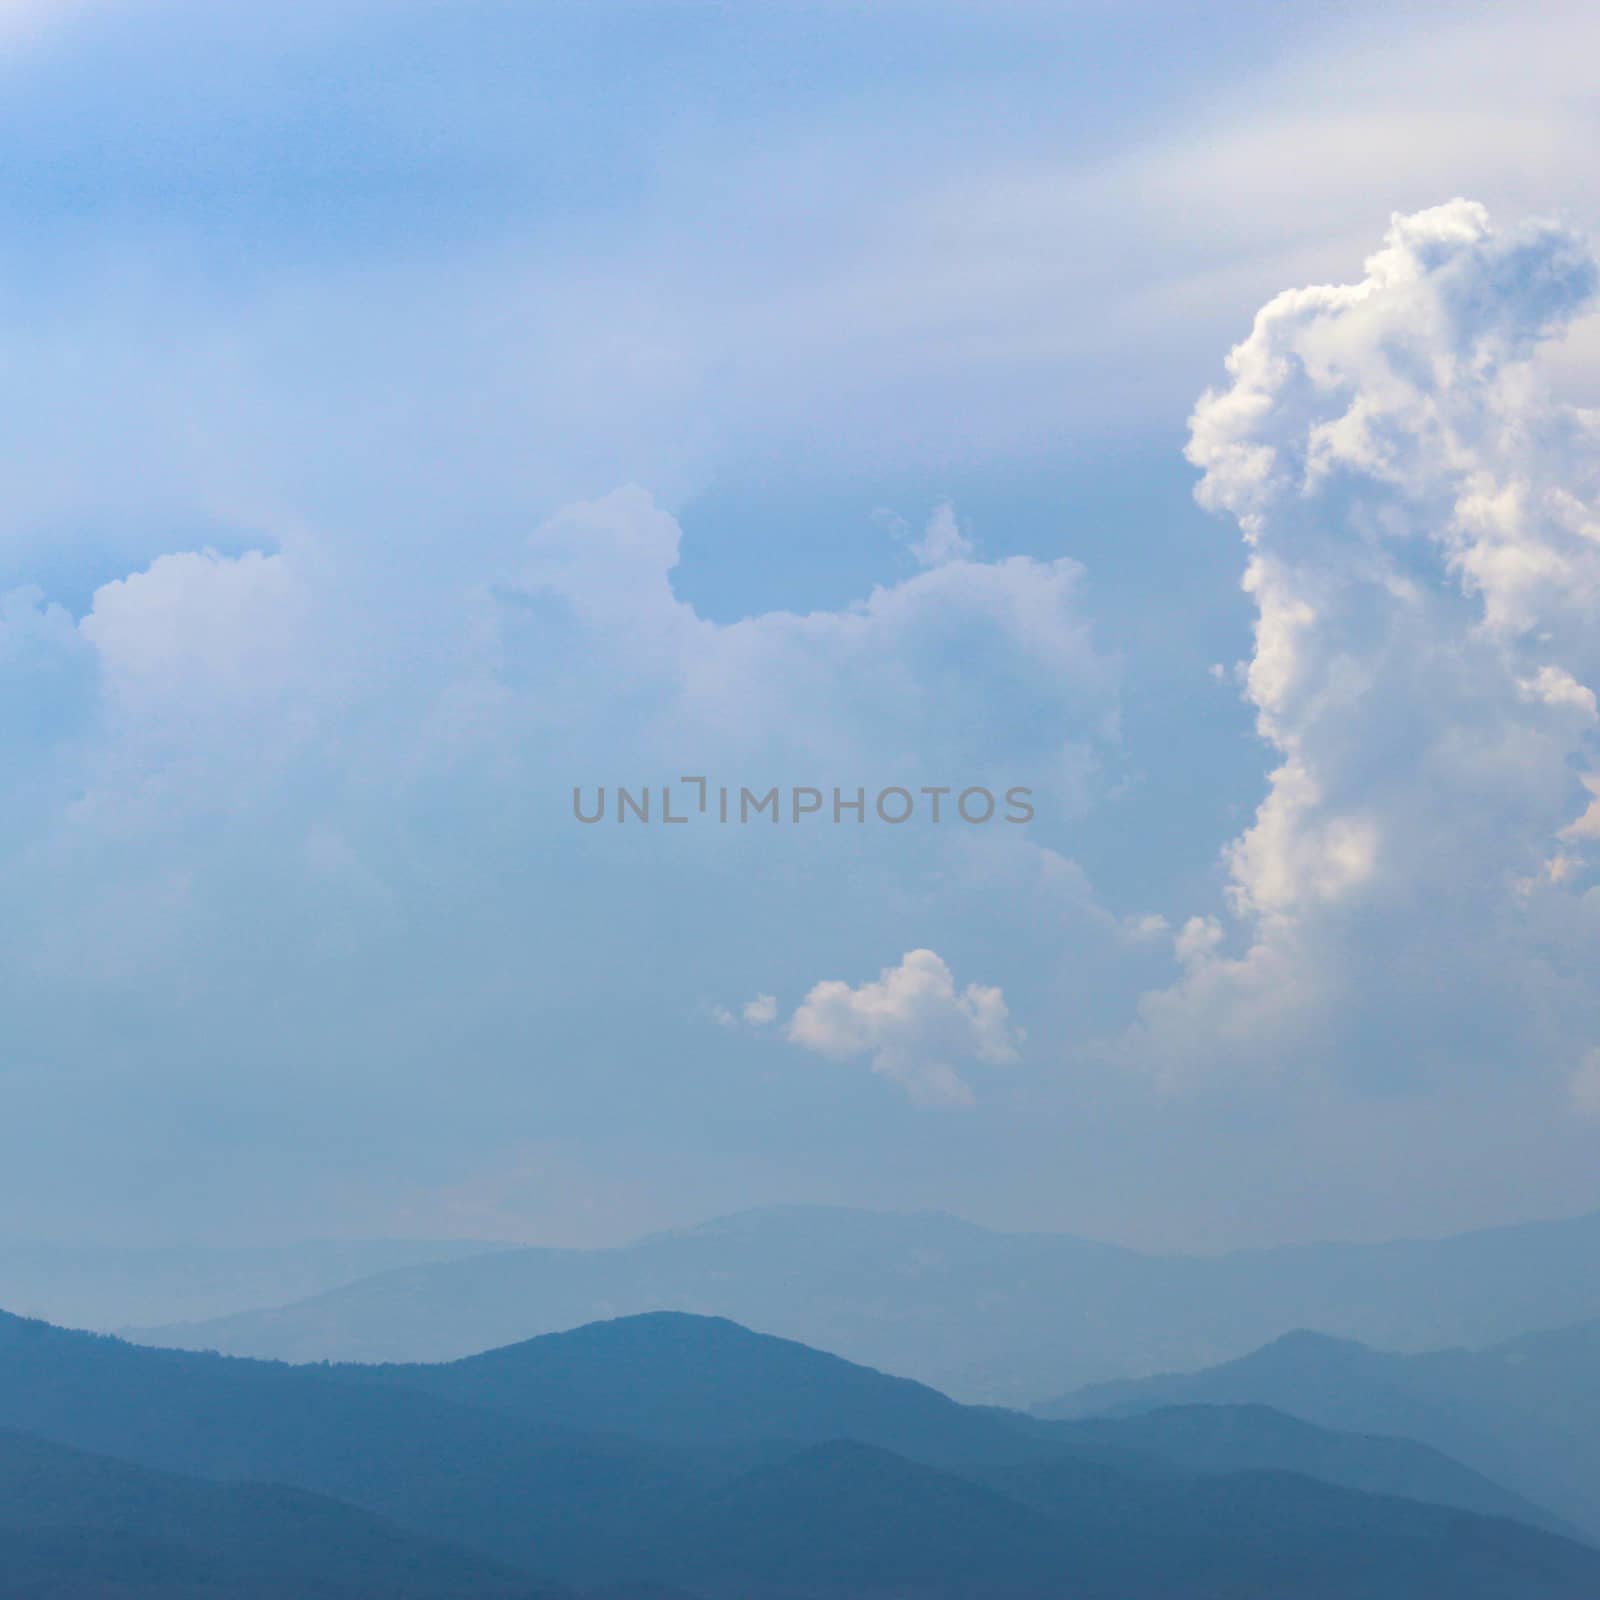 Mountains and hills in the distance. Blue silhouette of a mountain in the distance, with clouds in the blue sky. by mahirrov